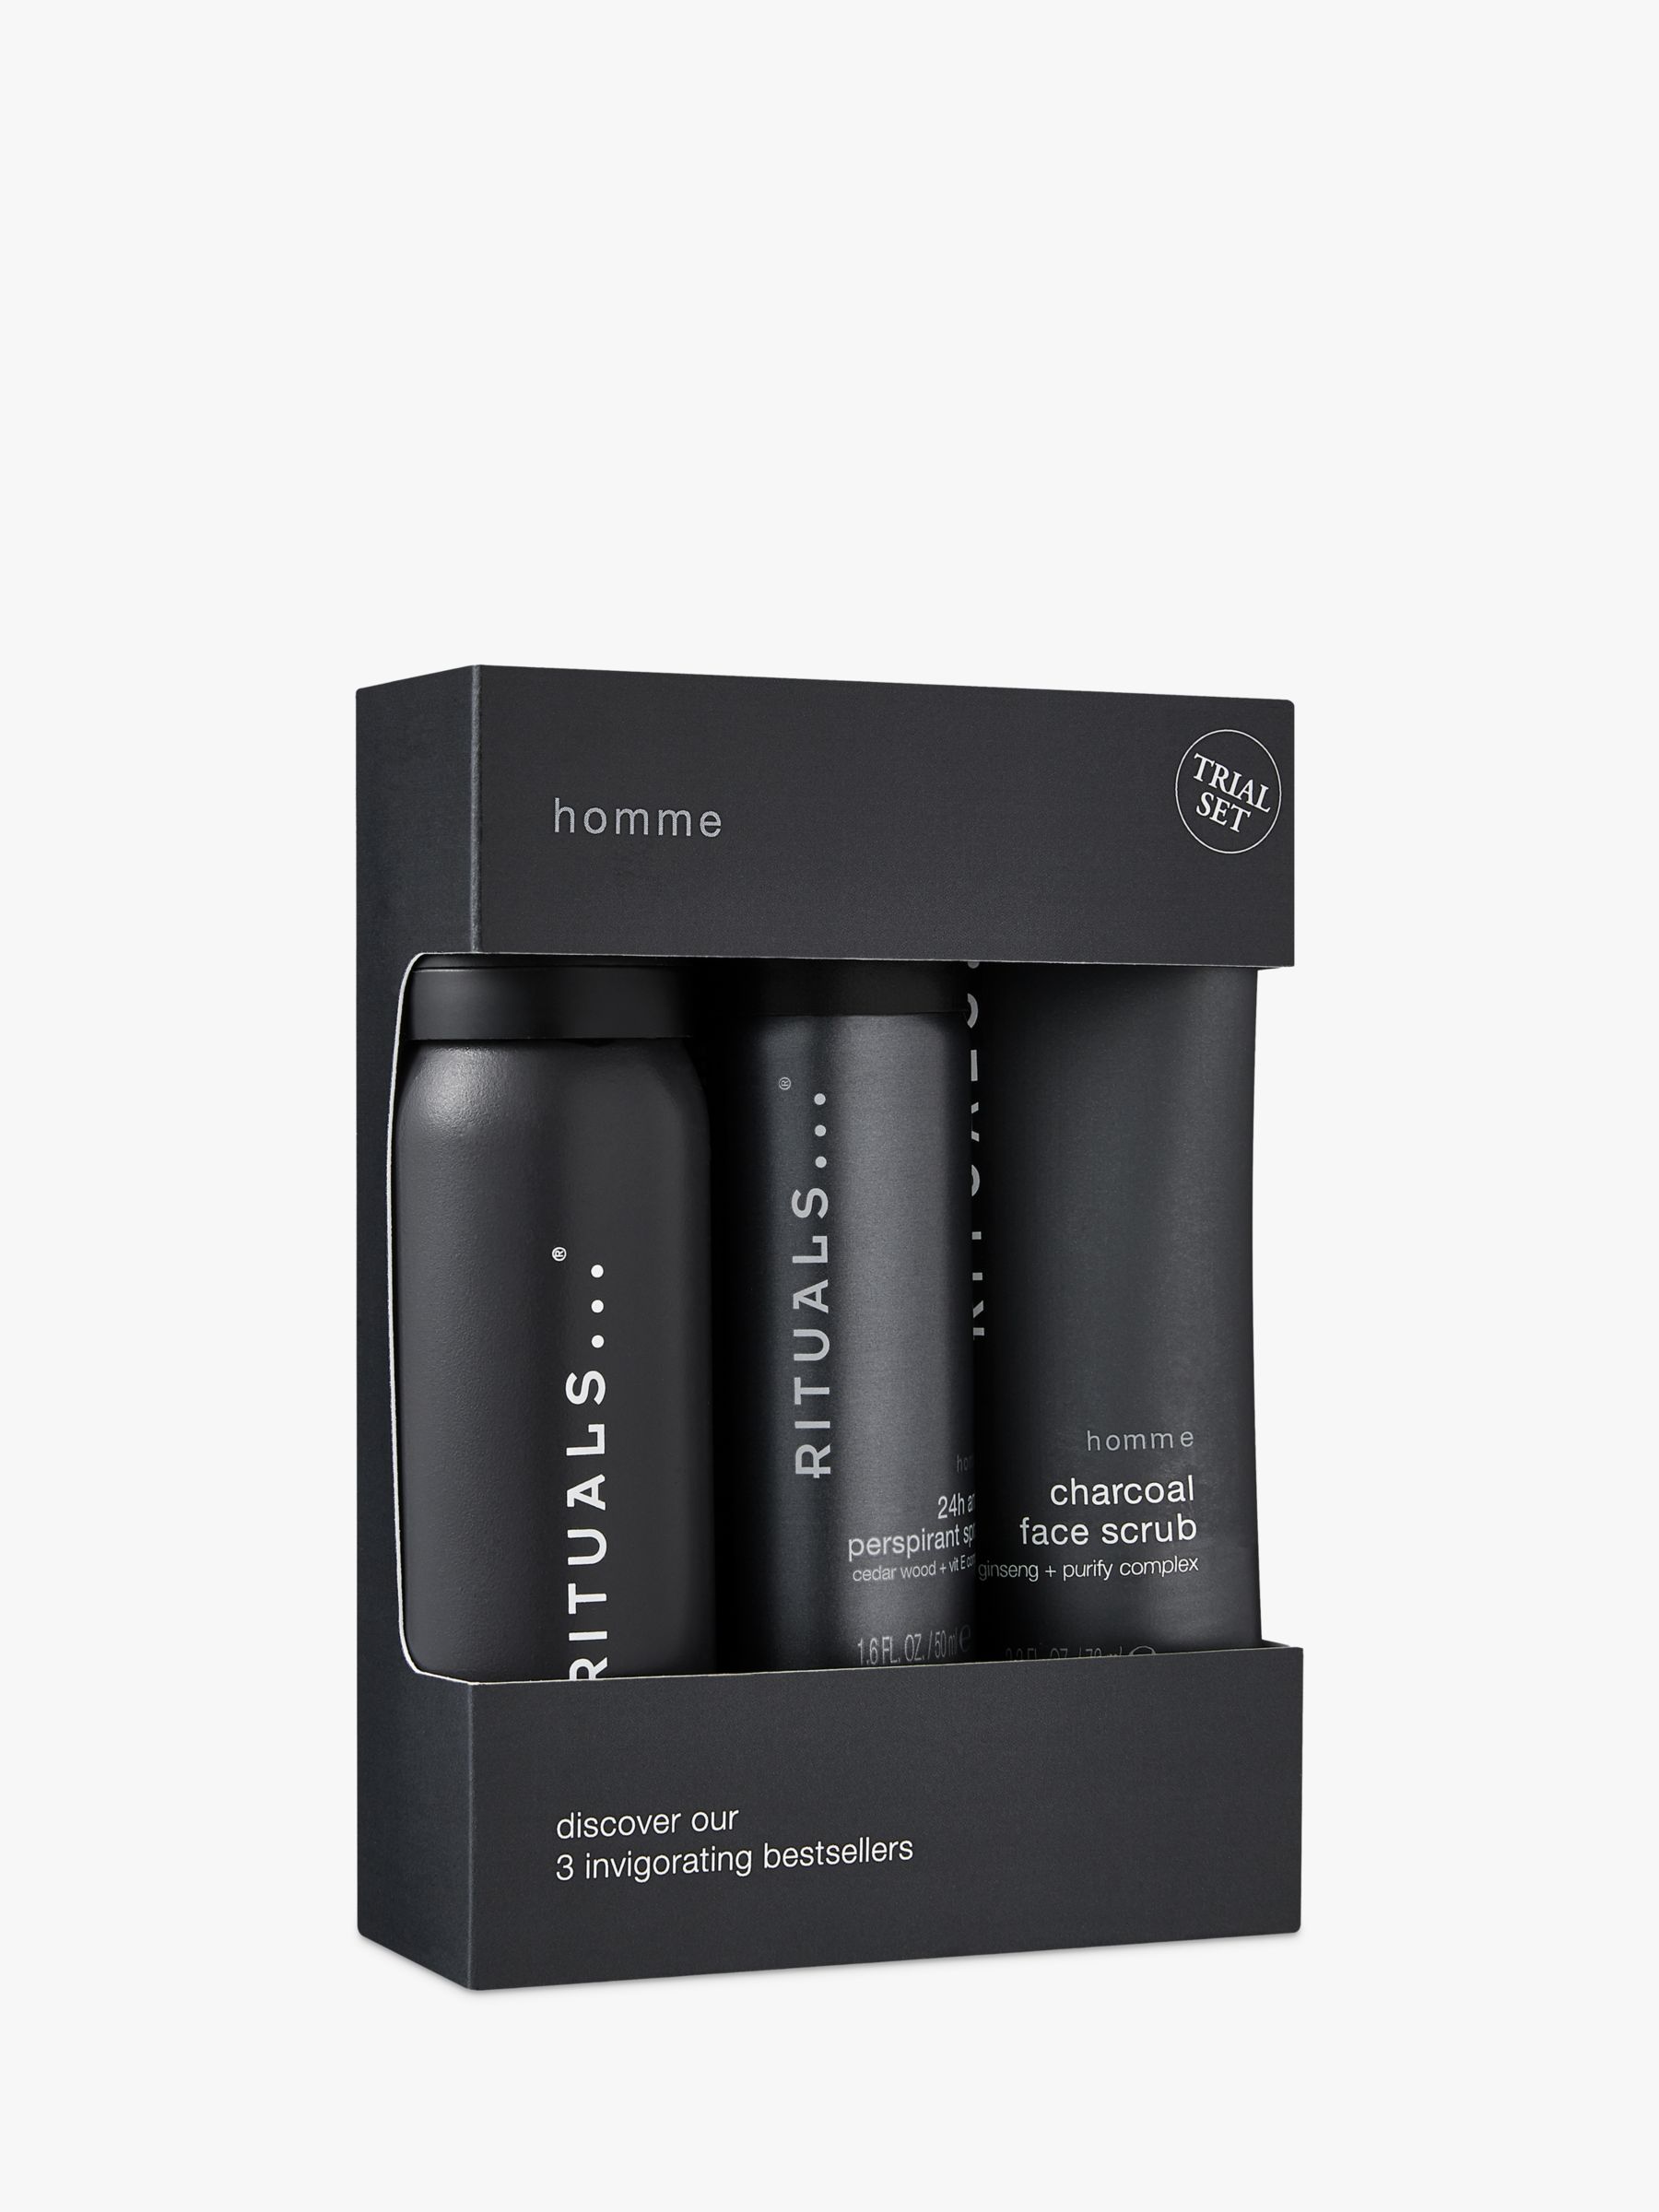 Rituals Homme Invigorating Bestsellers Bodycare Gift Set 1